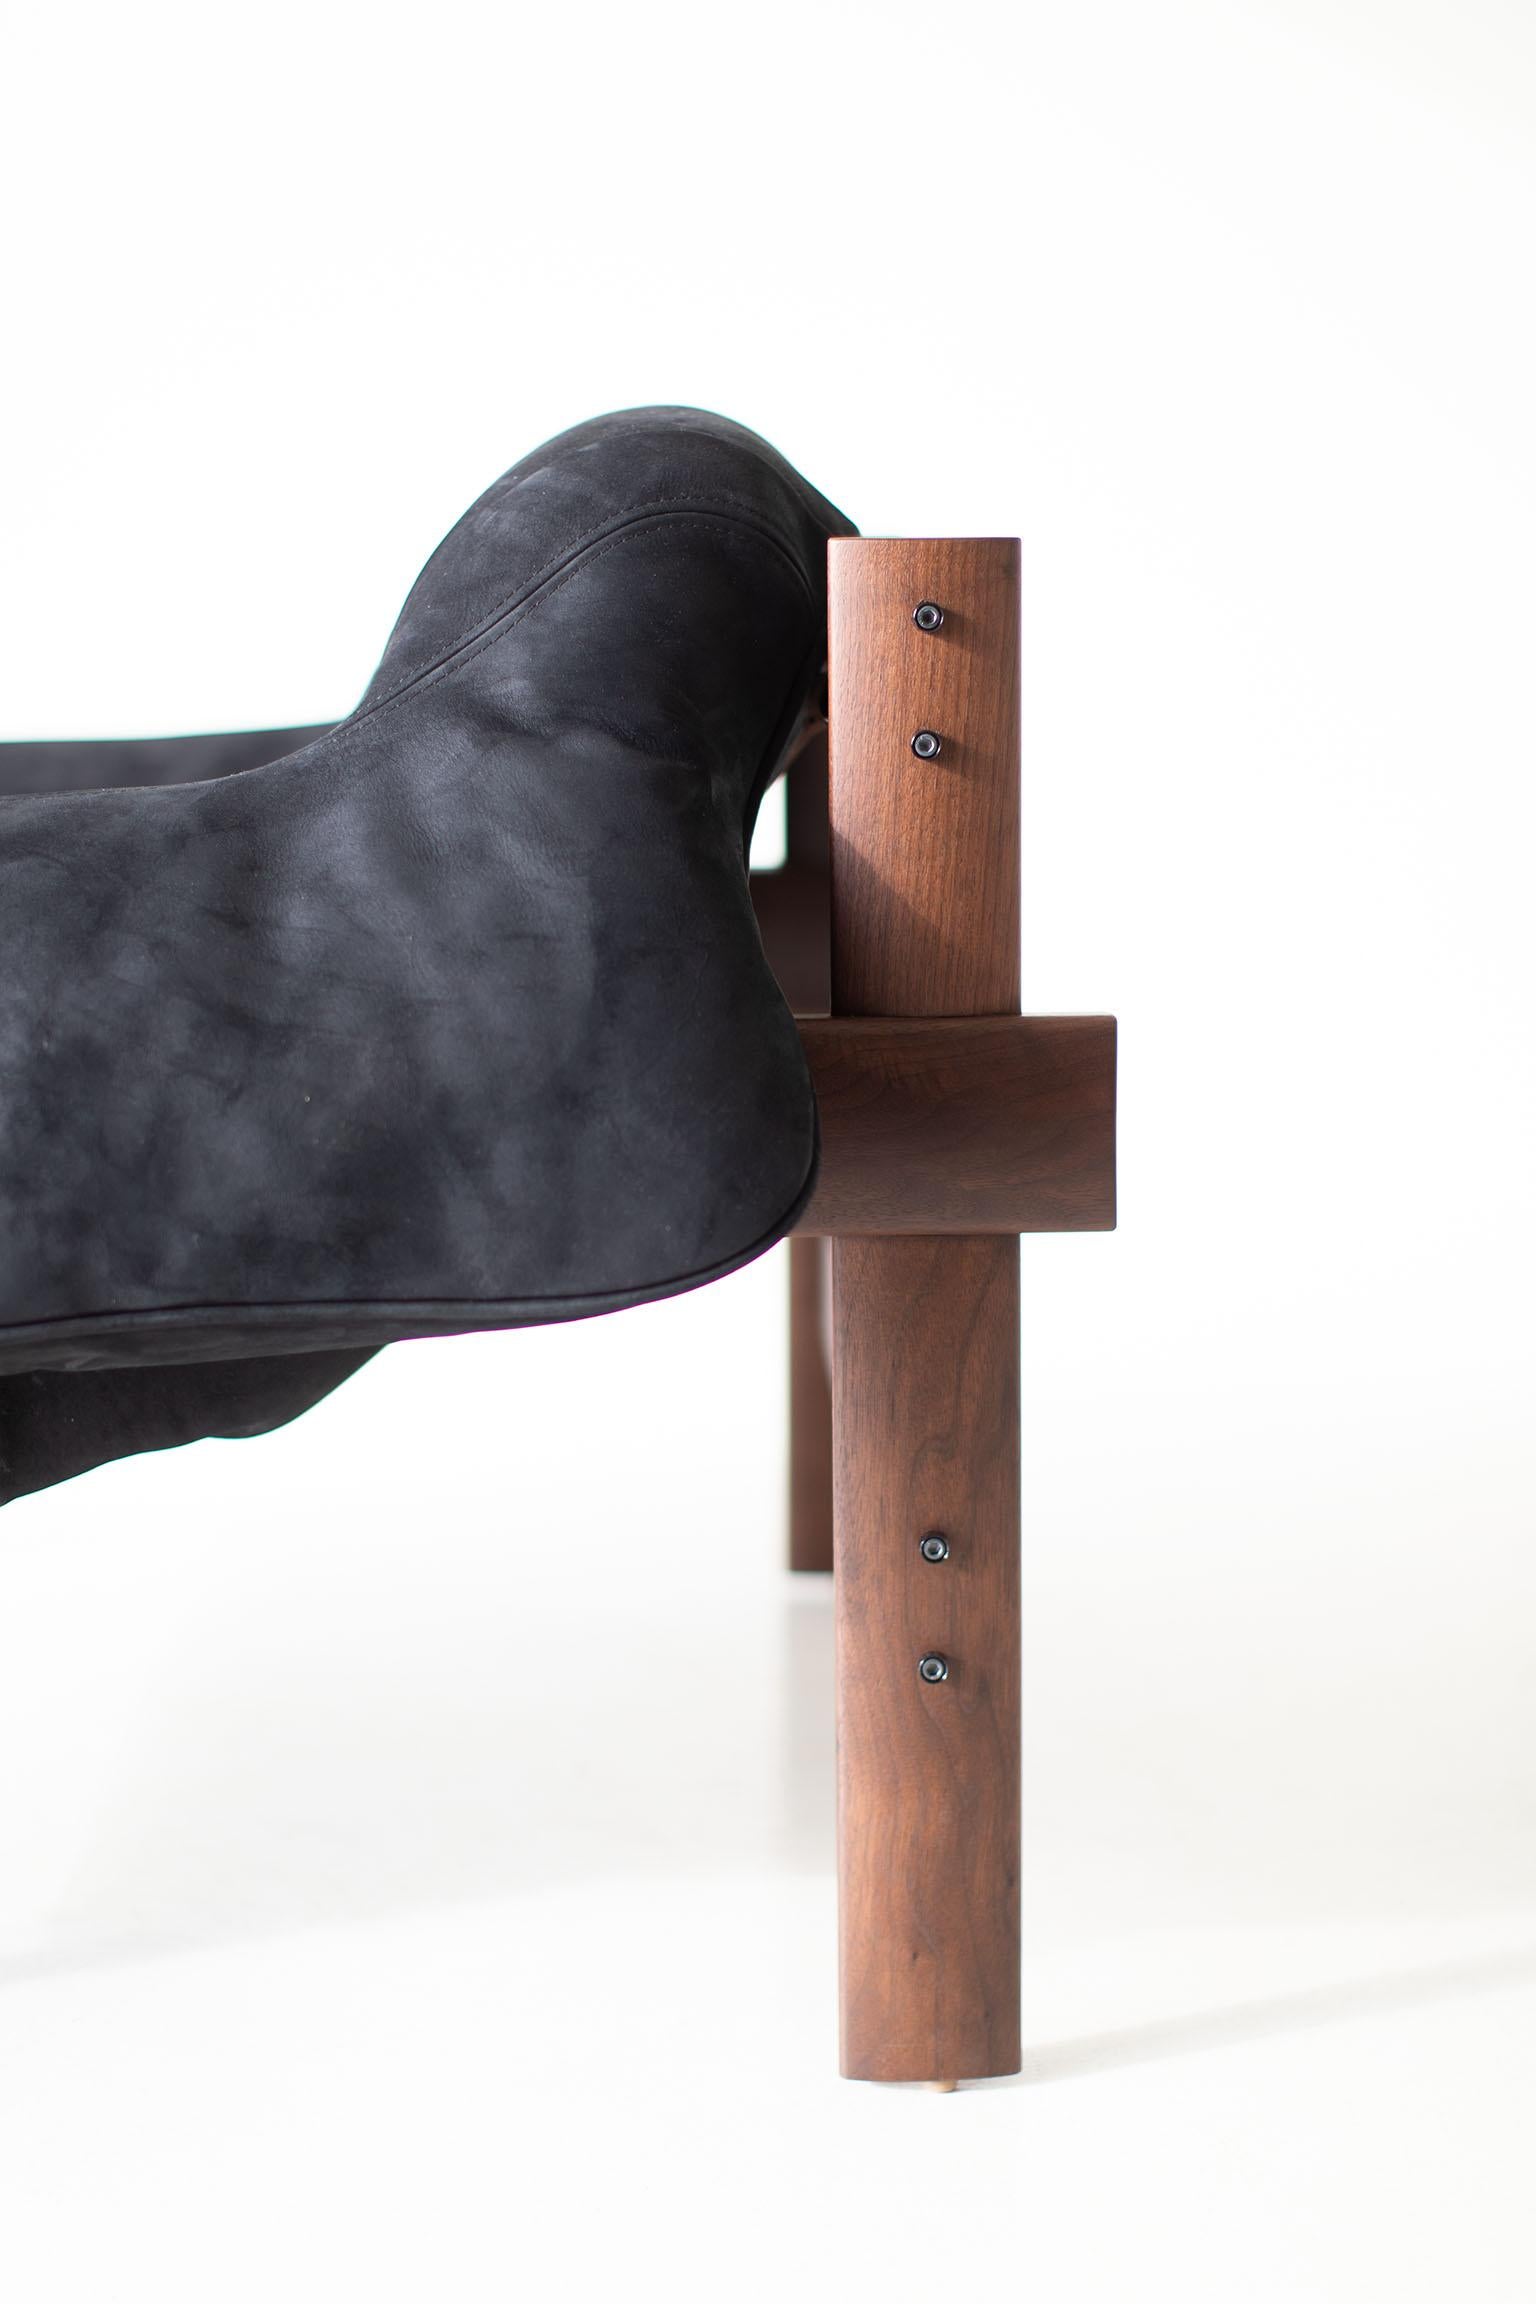 Hand-Crafted Craft Lounge Chairs, Percival Lounge Chairs, Black Leather and Walnut  For Sale